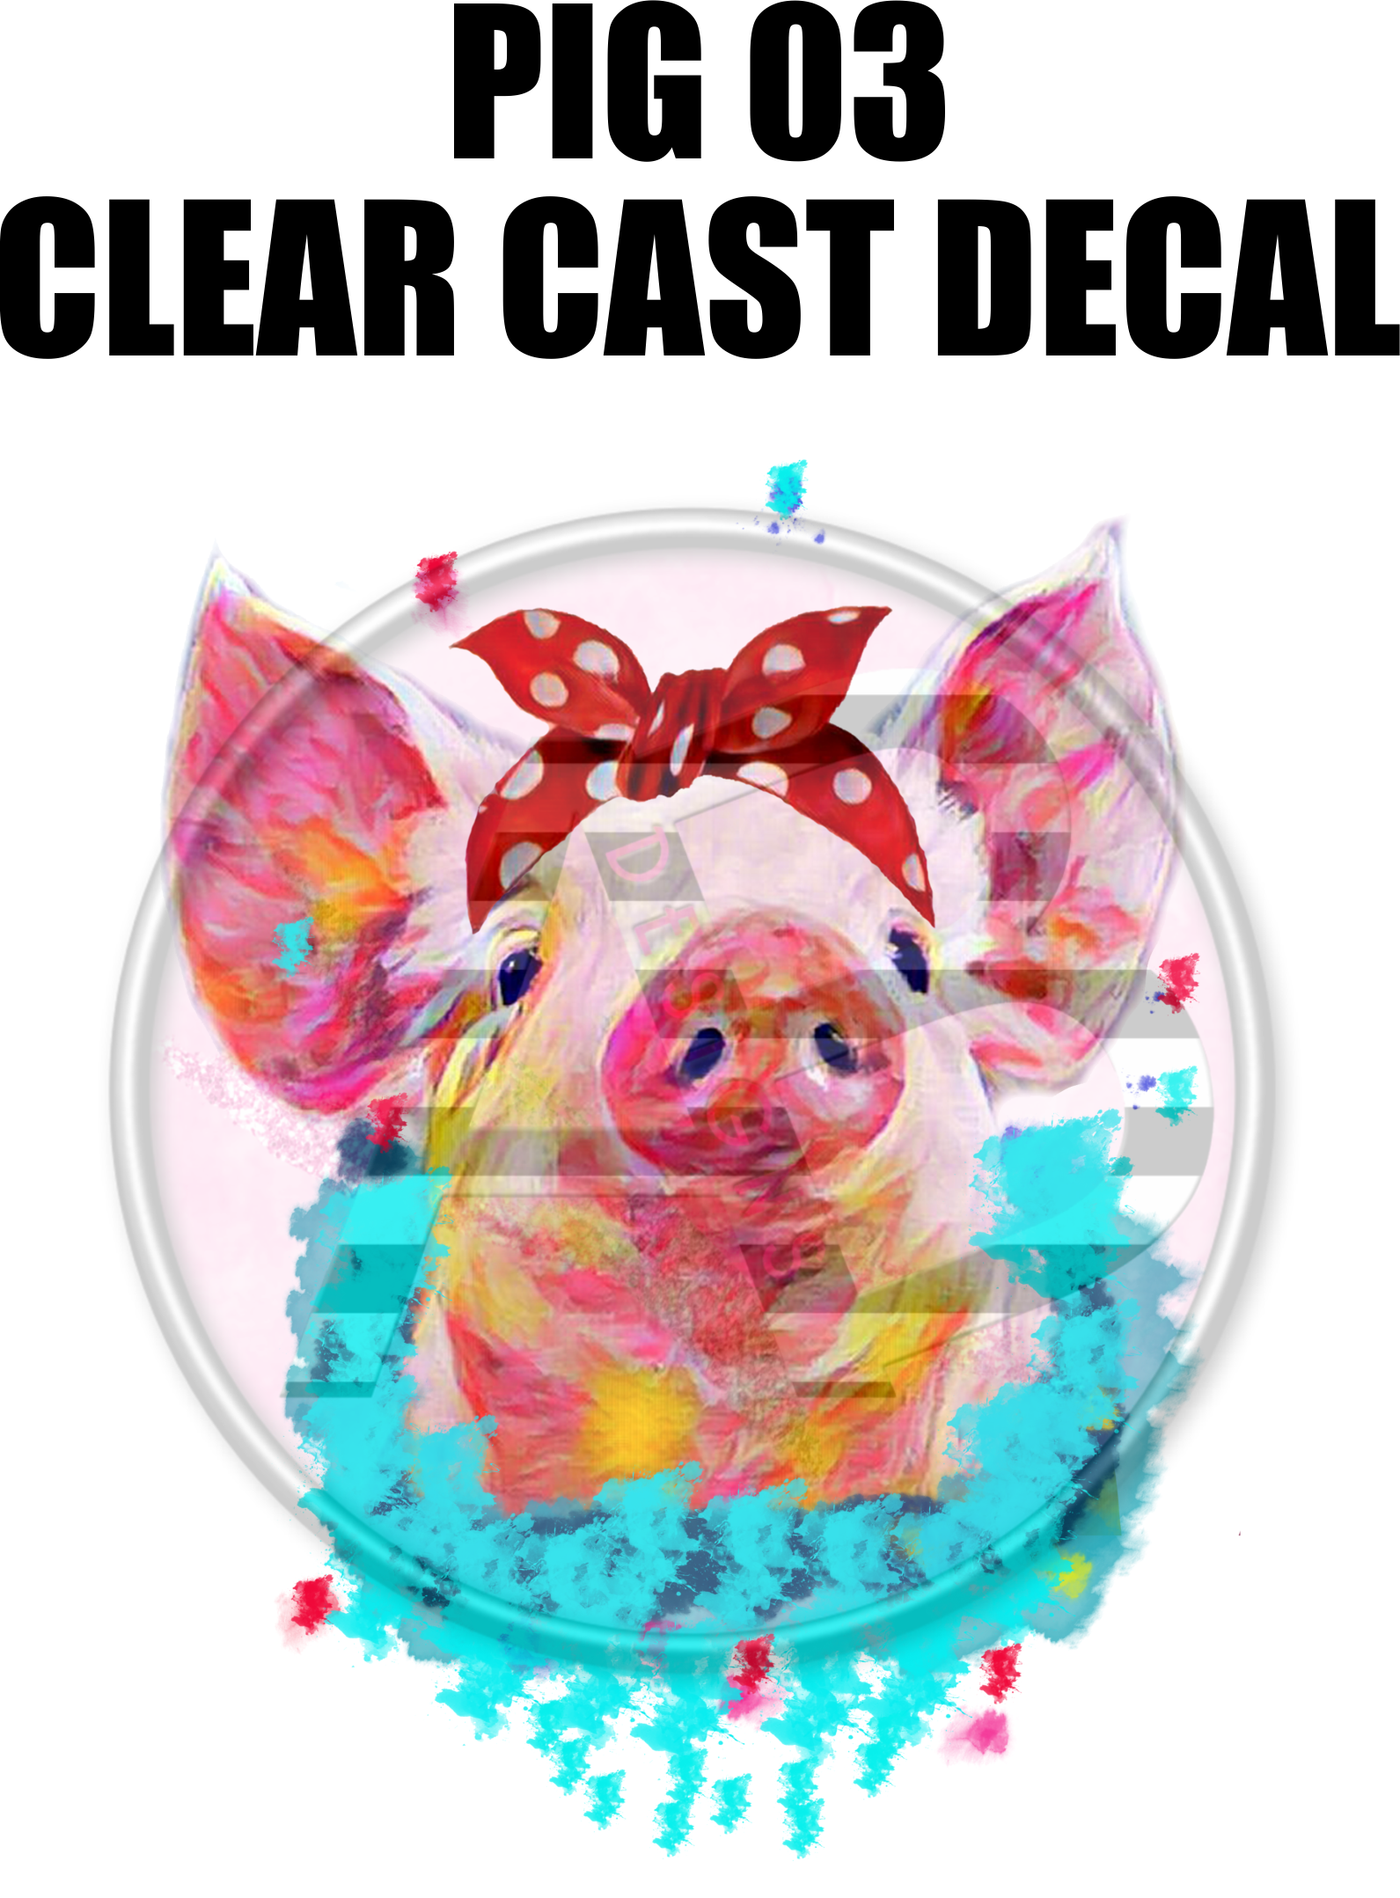 Pig 03 - Clear Cast Decal-425